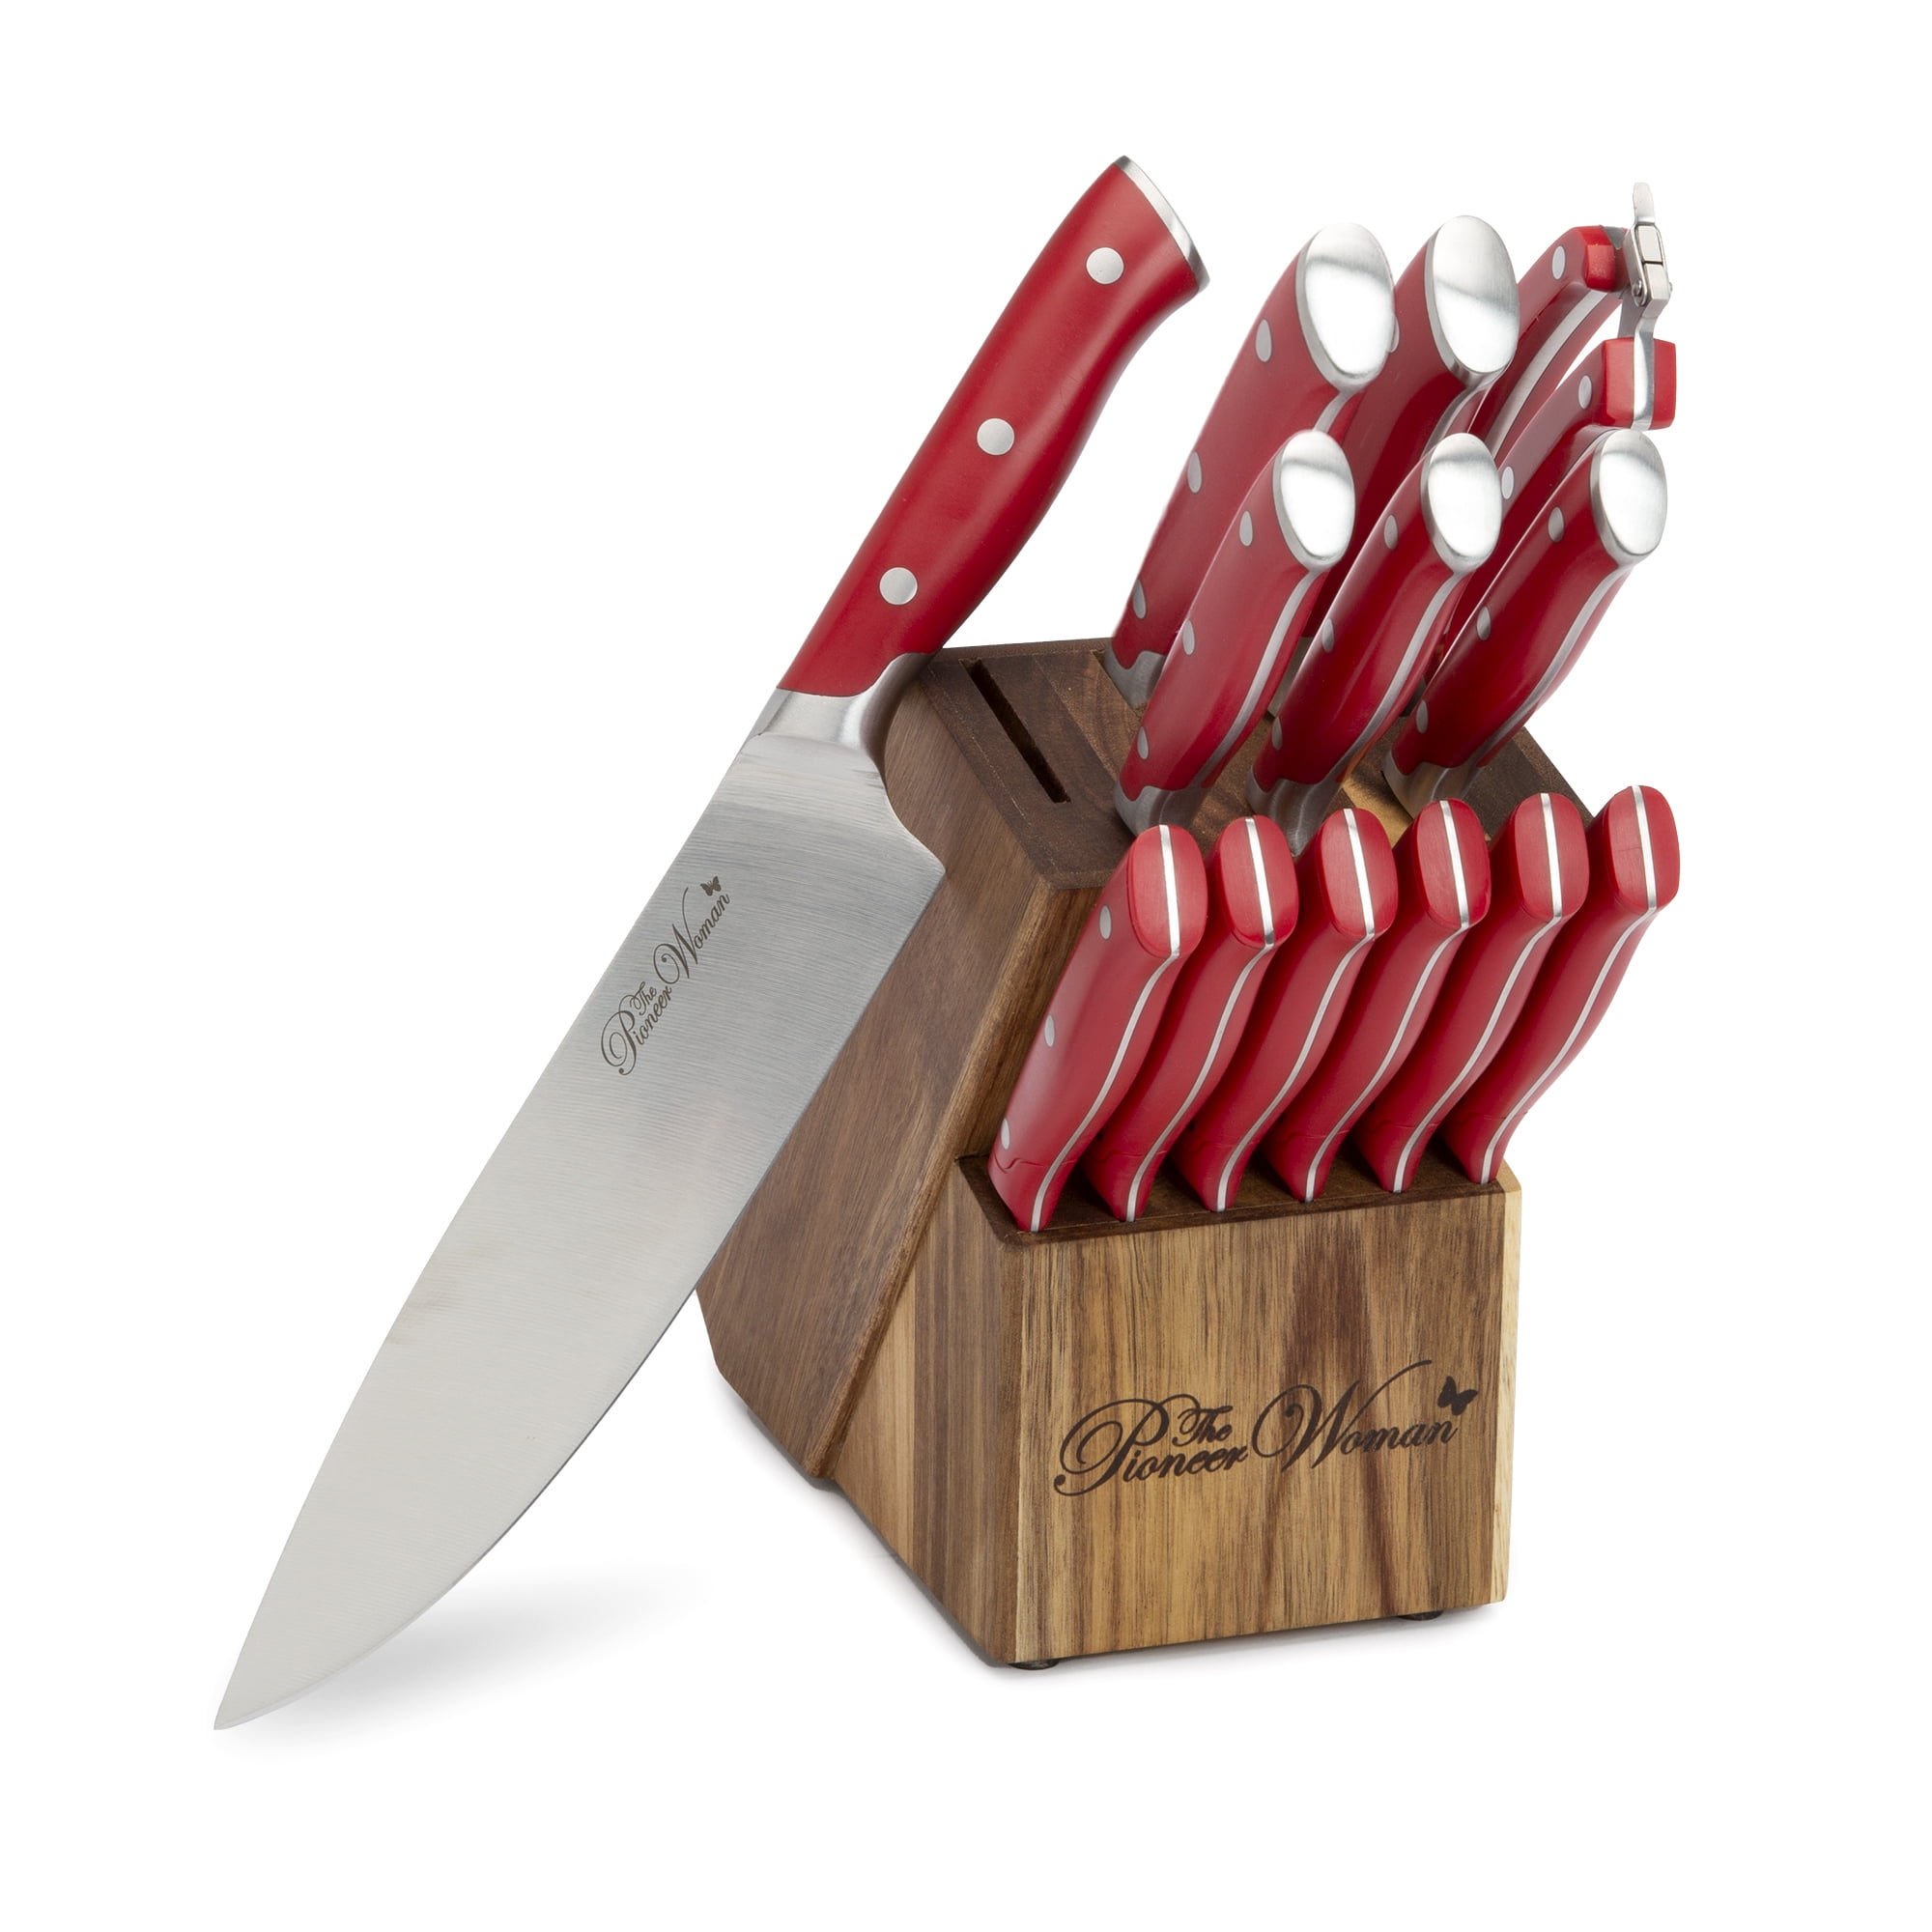 The Pioneer Woman Pioneer Signature 14-Piece Stainless Steel Knife Block Set, Floral